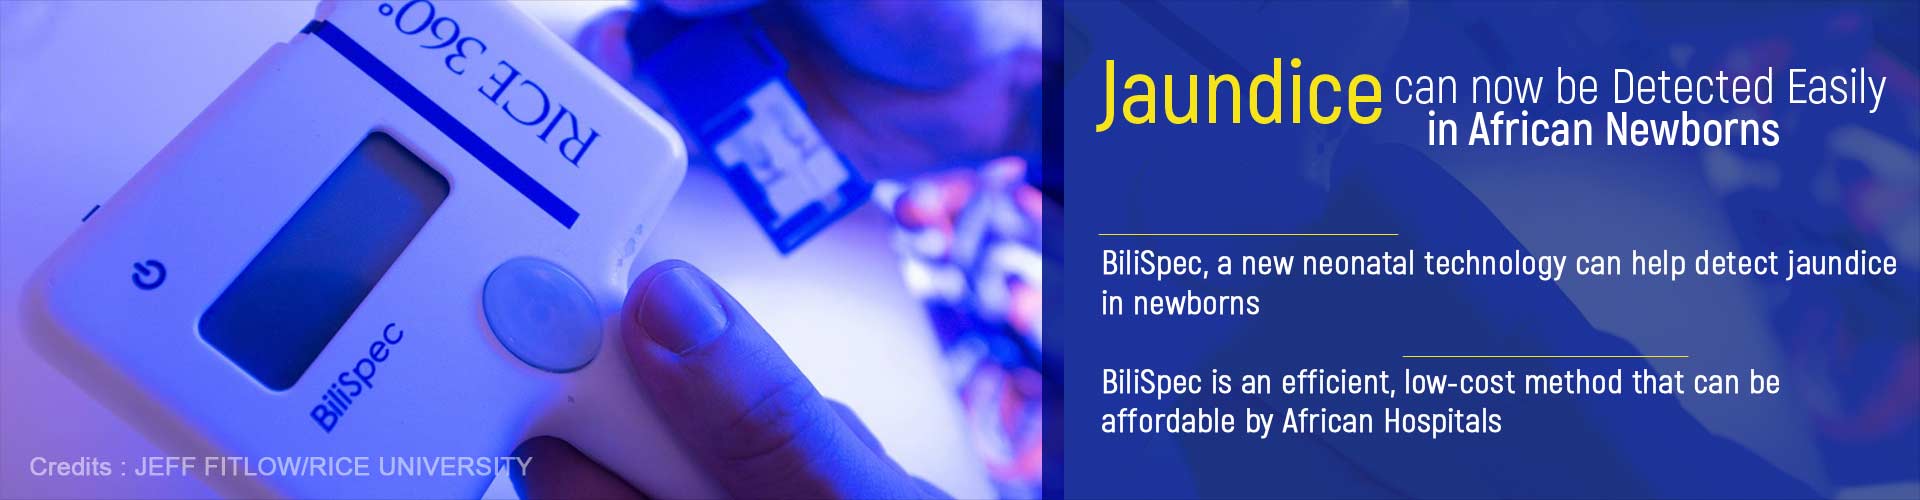 Jaundice can now be detected easily in African newborns
- BiliSpec, a new neonatal technology can help detect jaundice in newborns
- BiliSpec is an efficient, low-cost method that can be affordable by African Hospitals